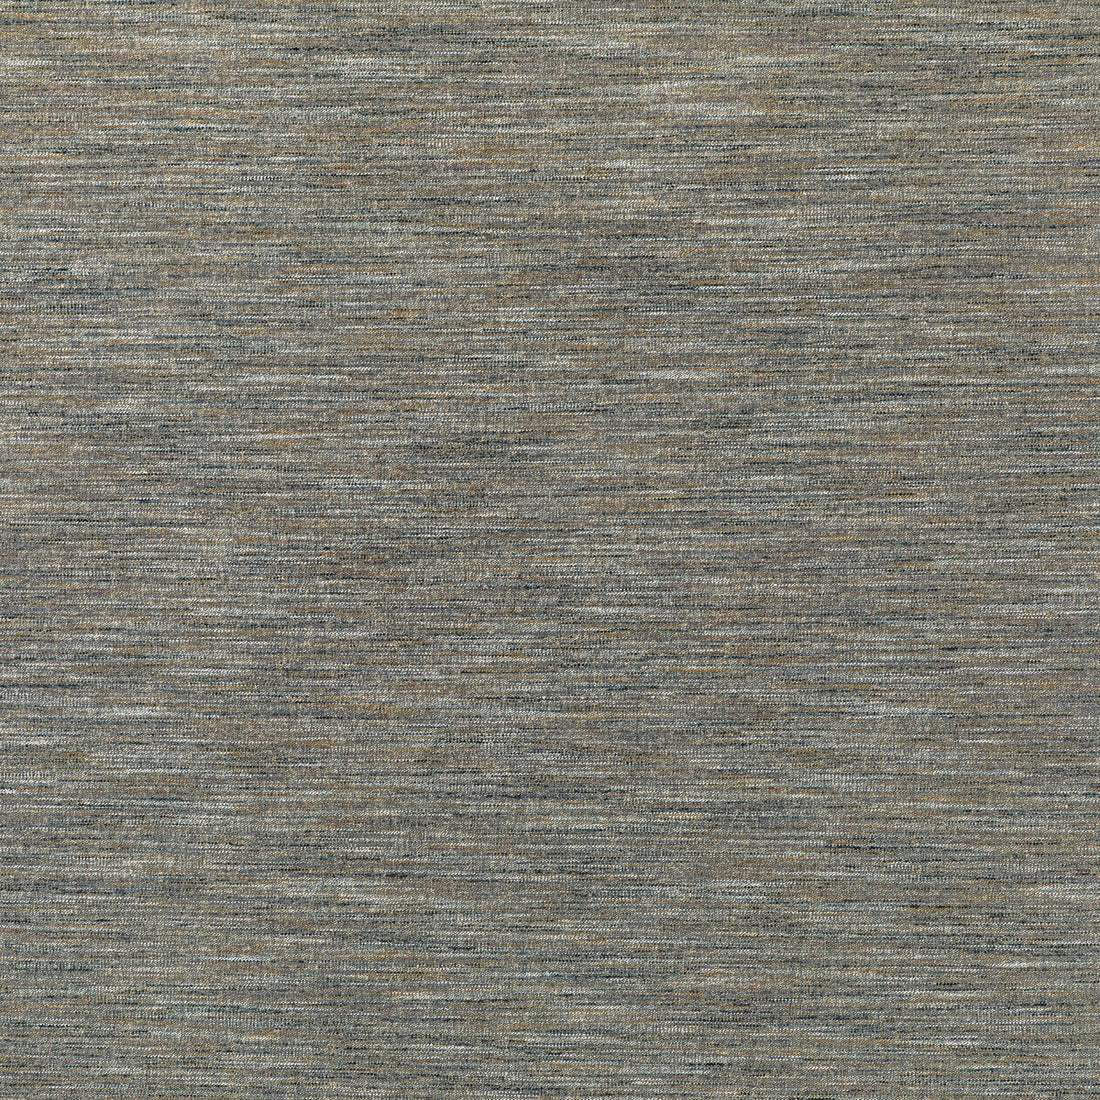 Kravet Smart fabric in 36297-21 color - pattern 36297.21.0 - by Kravet Smart in the Performance Crypton Home collection